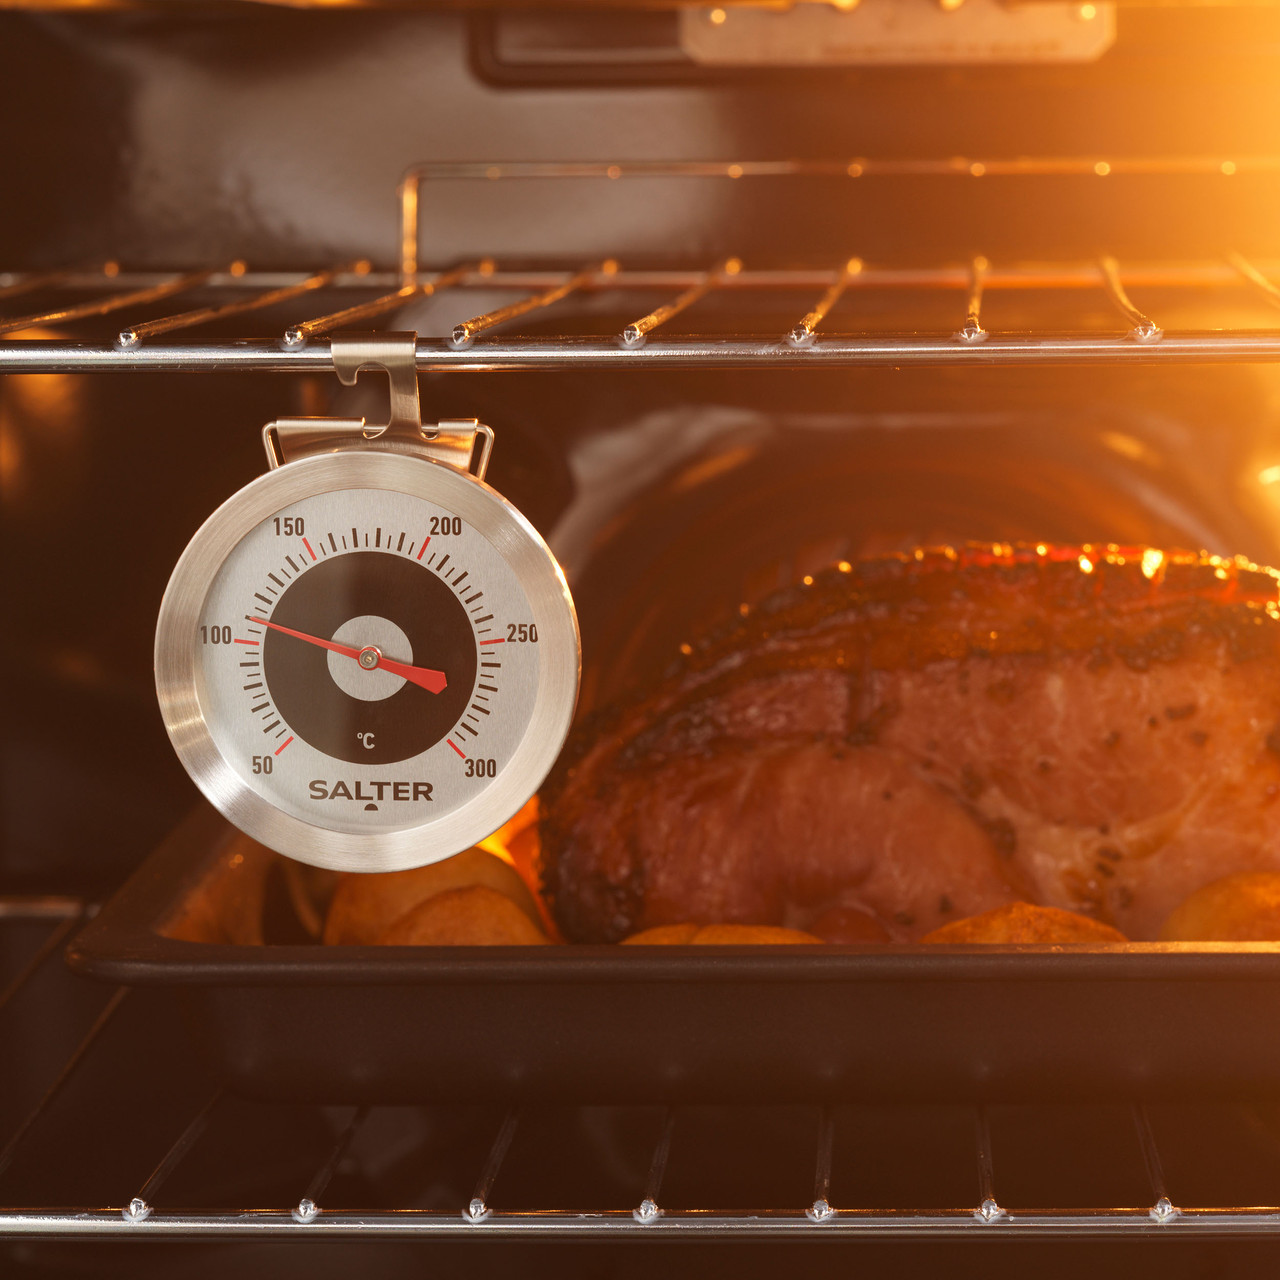 Salter Traditional Oven Temperature Thermometer